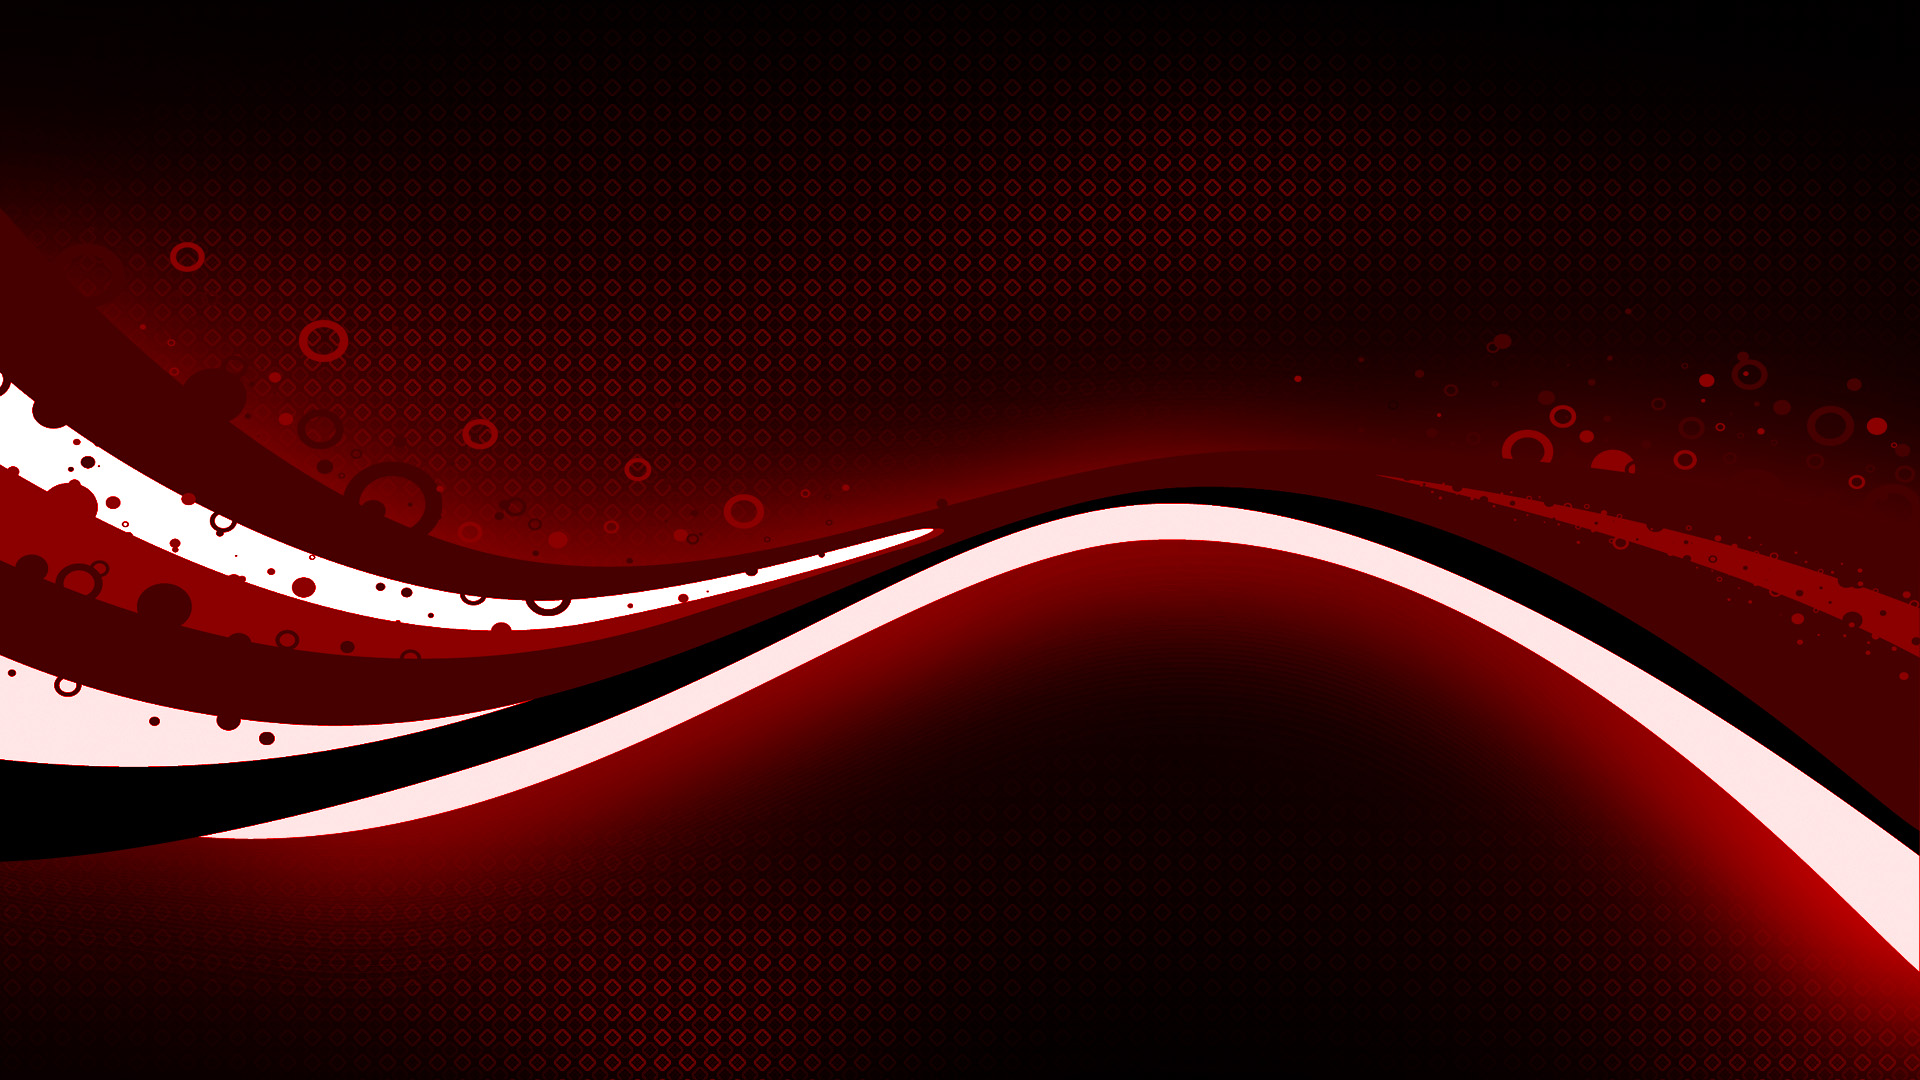 Black And Red Wallpapers Download Free | PixelsTalk.Net